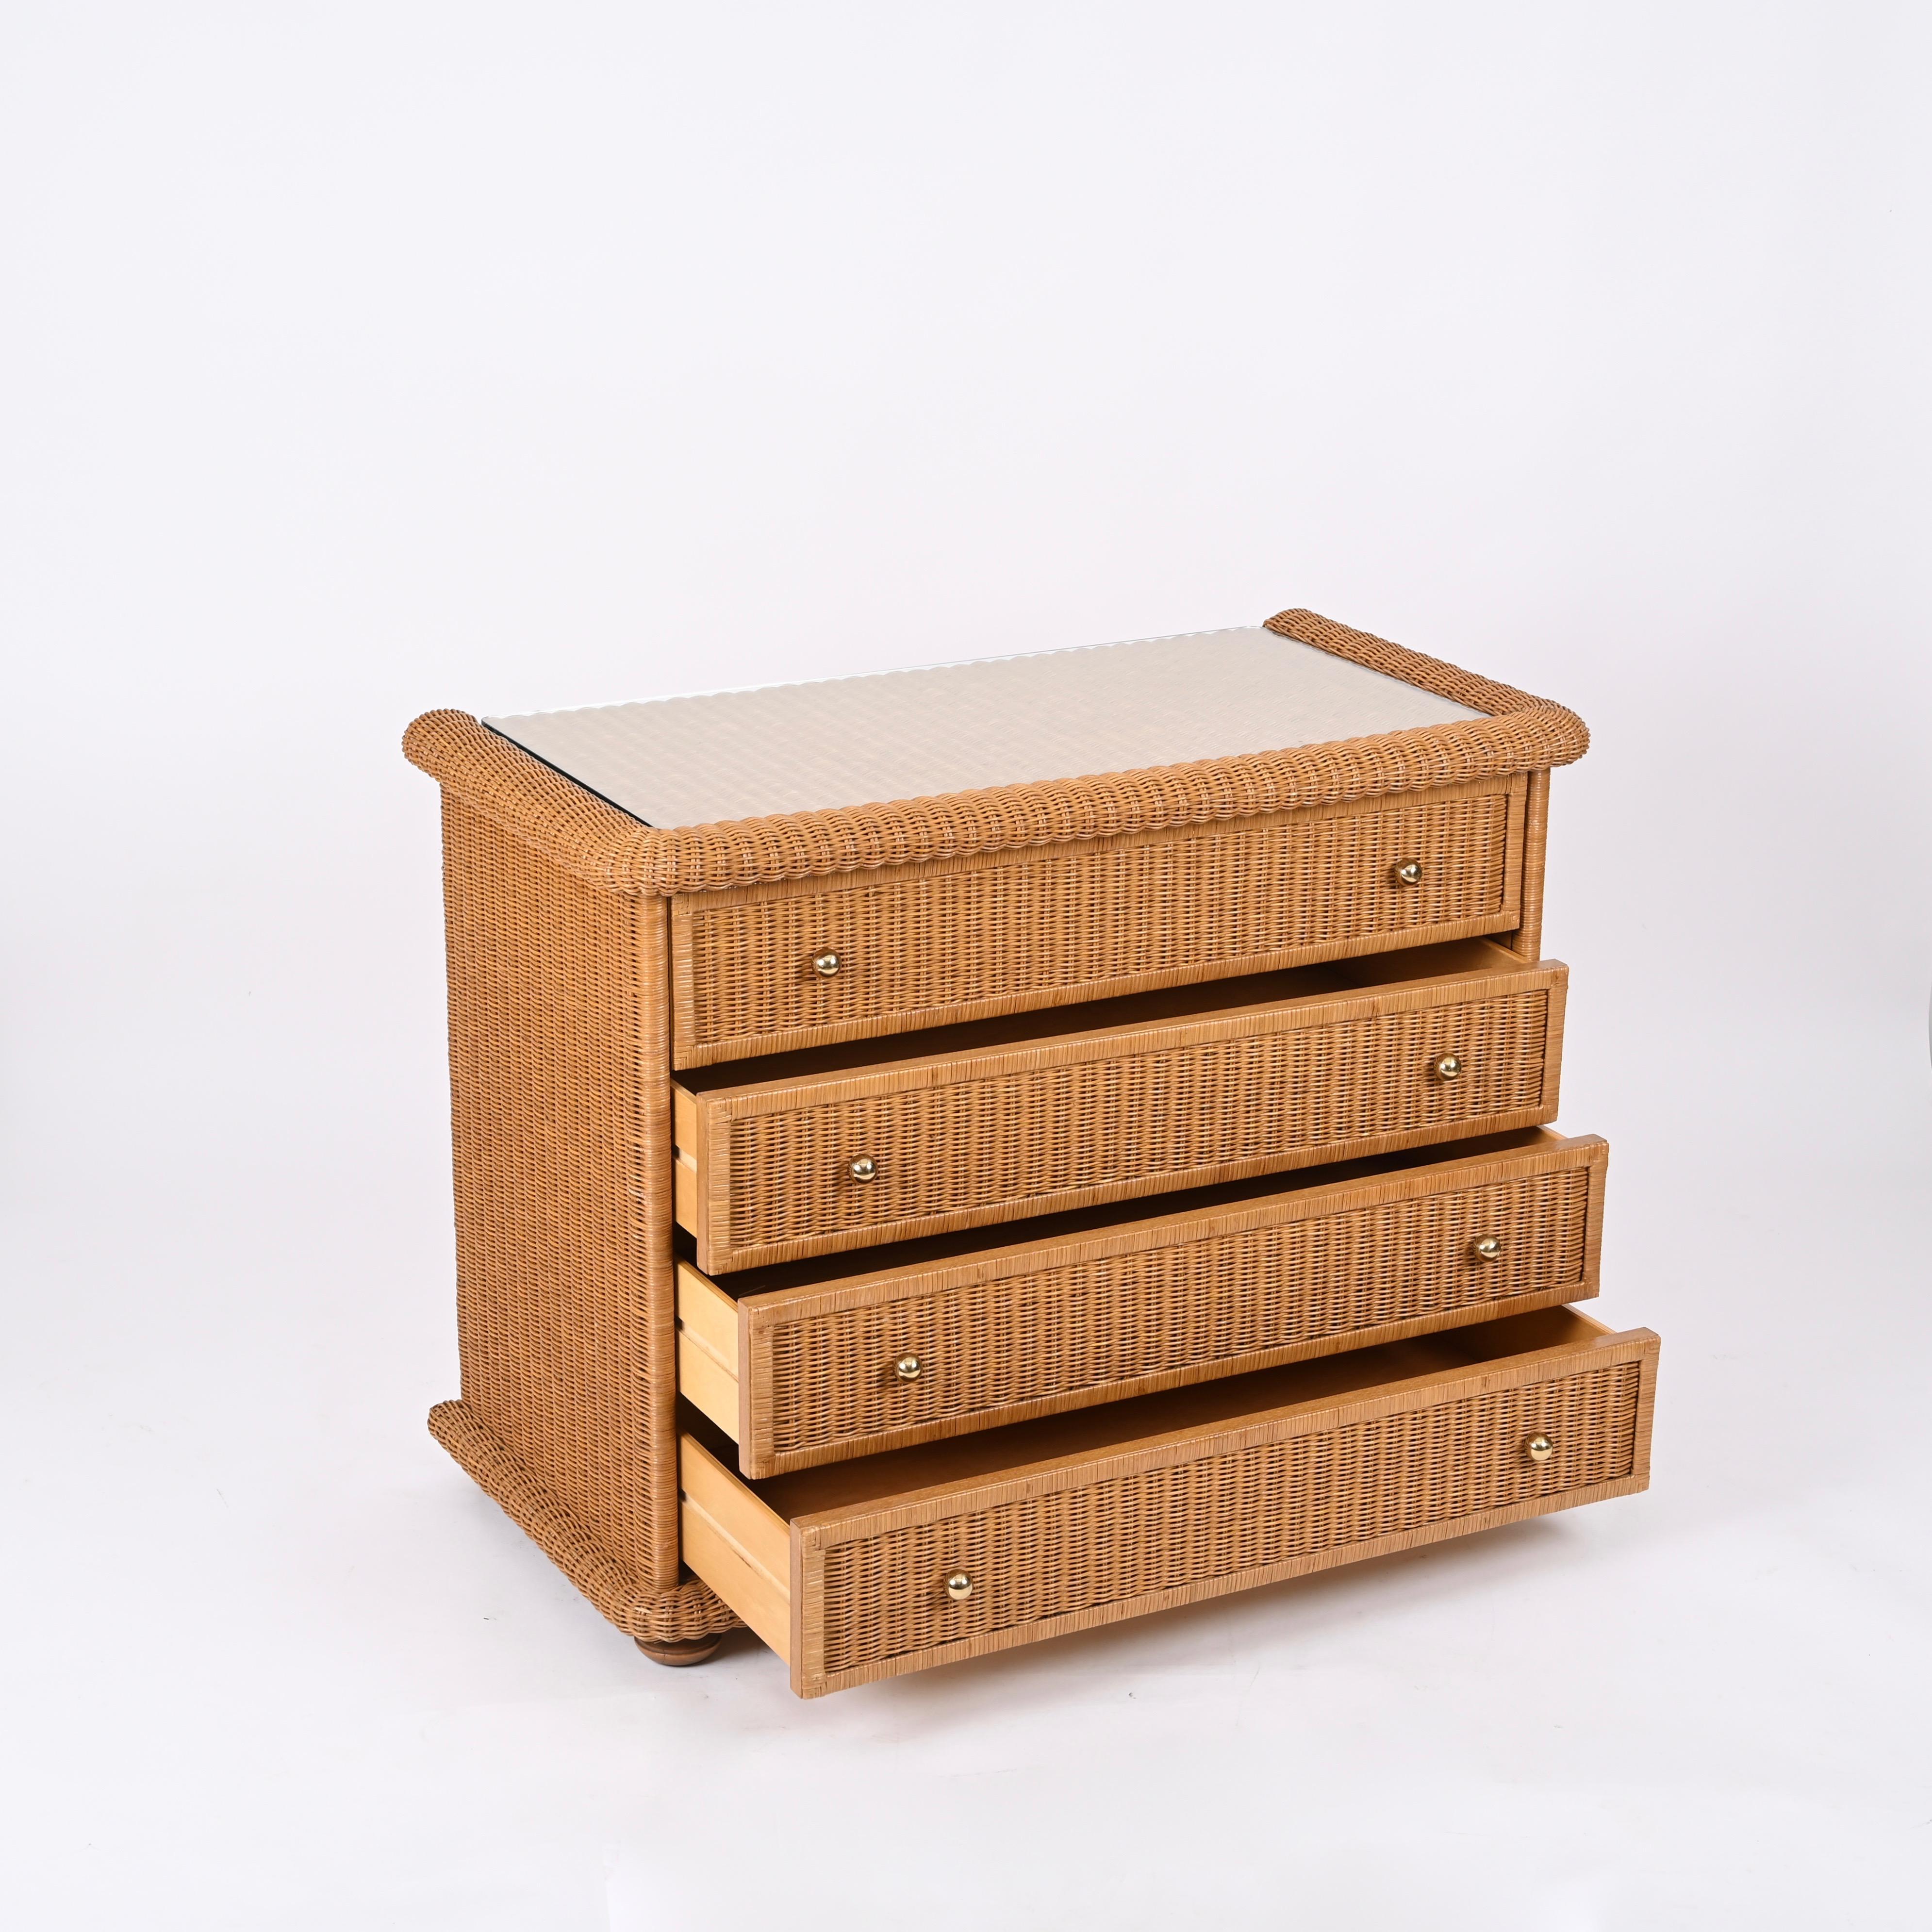 20th Century French Riviera Chest of Drawers in Woven Rattan by Vivai del Sud, Italy, 1970s For Sale